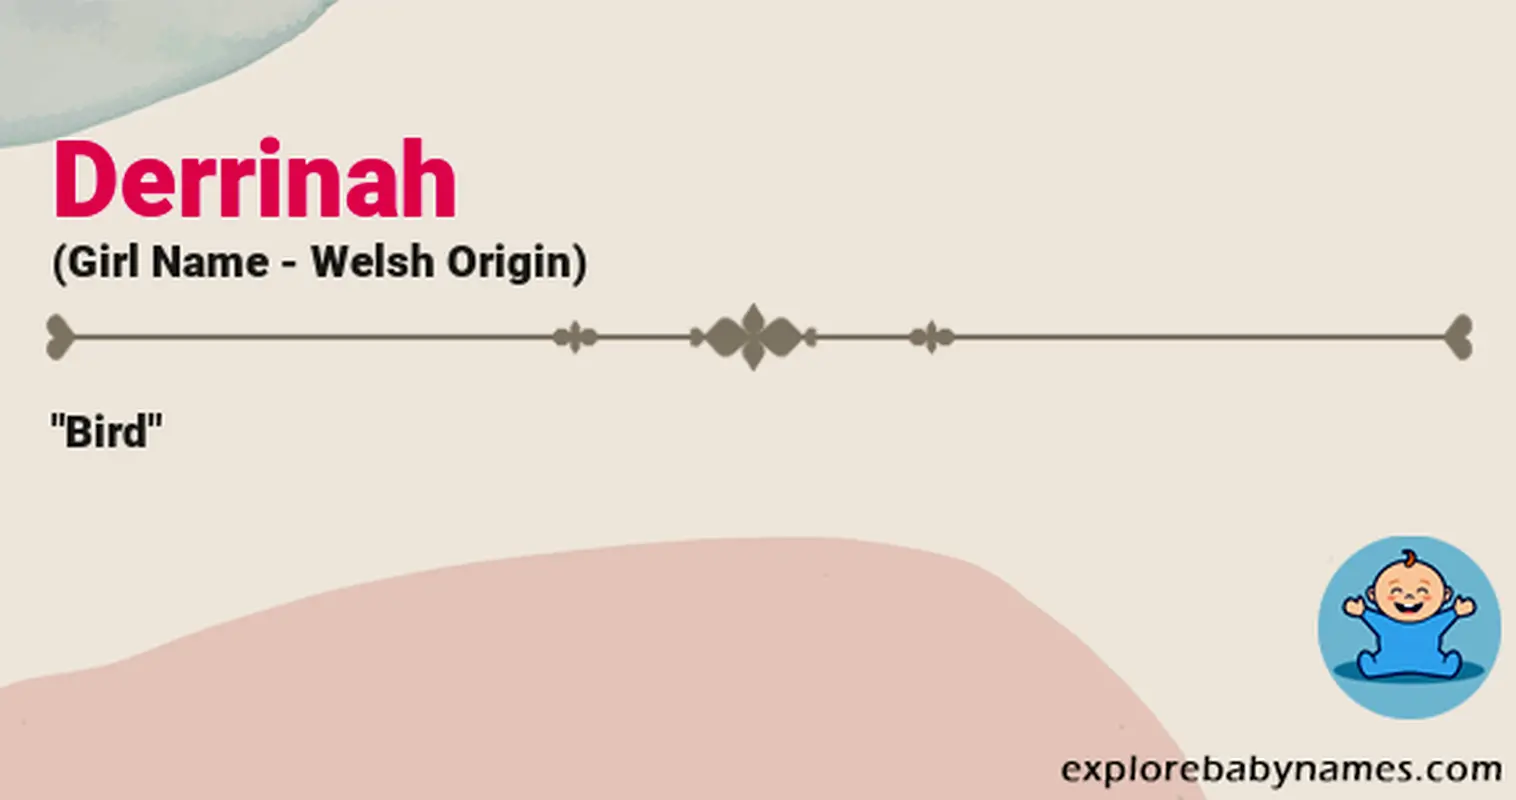 Meaning of Derrinah